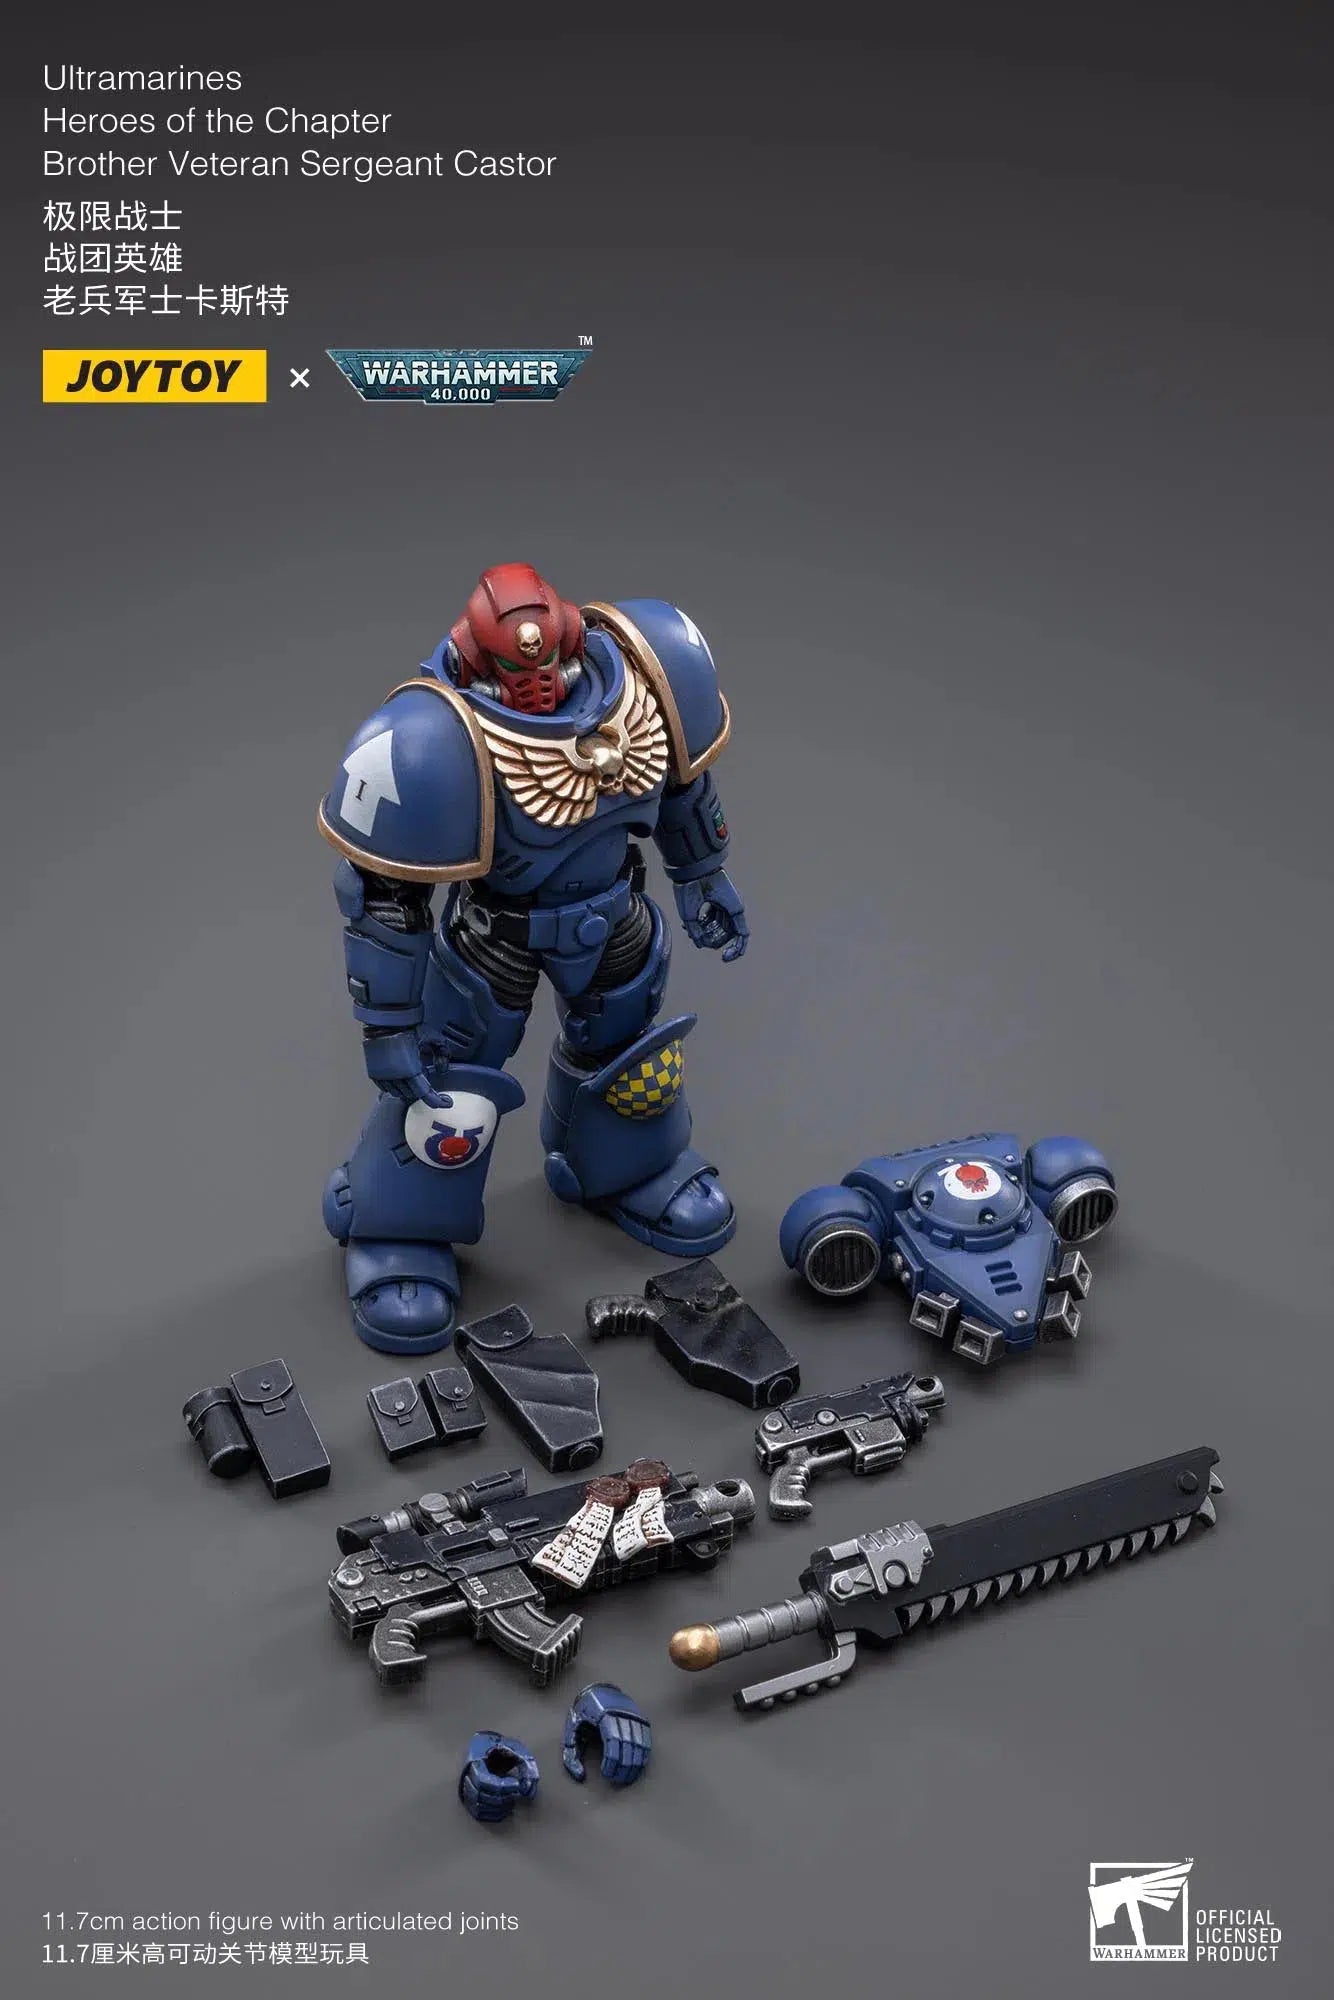 Warhammer 40K: Heroes of the Chapter: Brother Veteran Sergeant Castor: Joy Toy